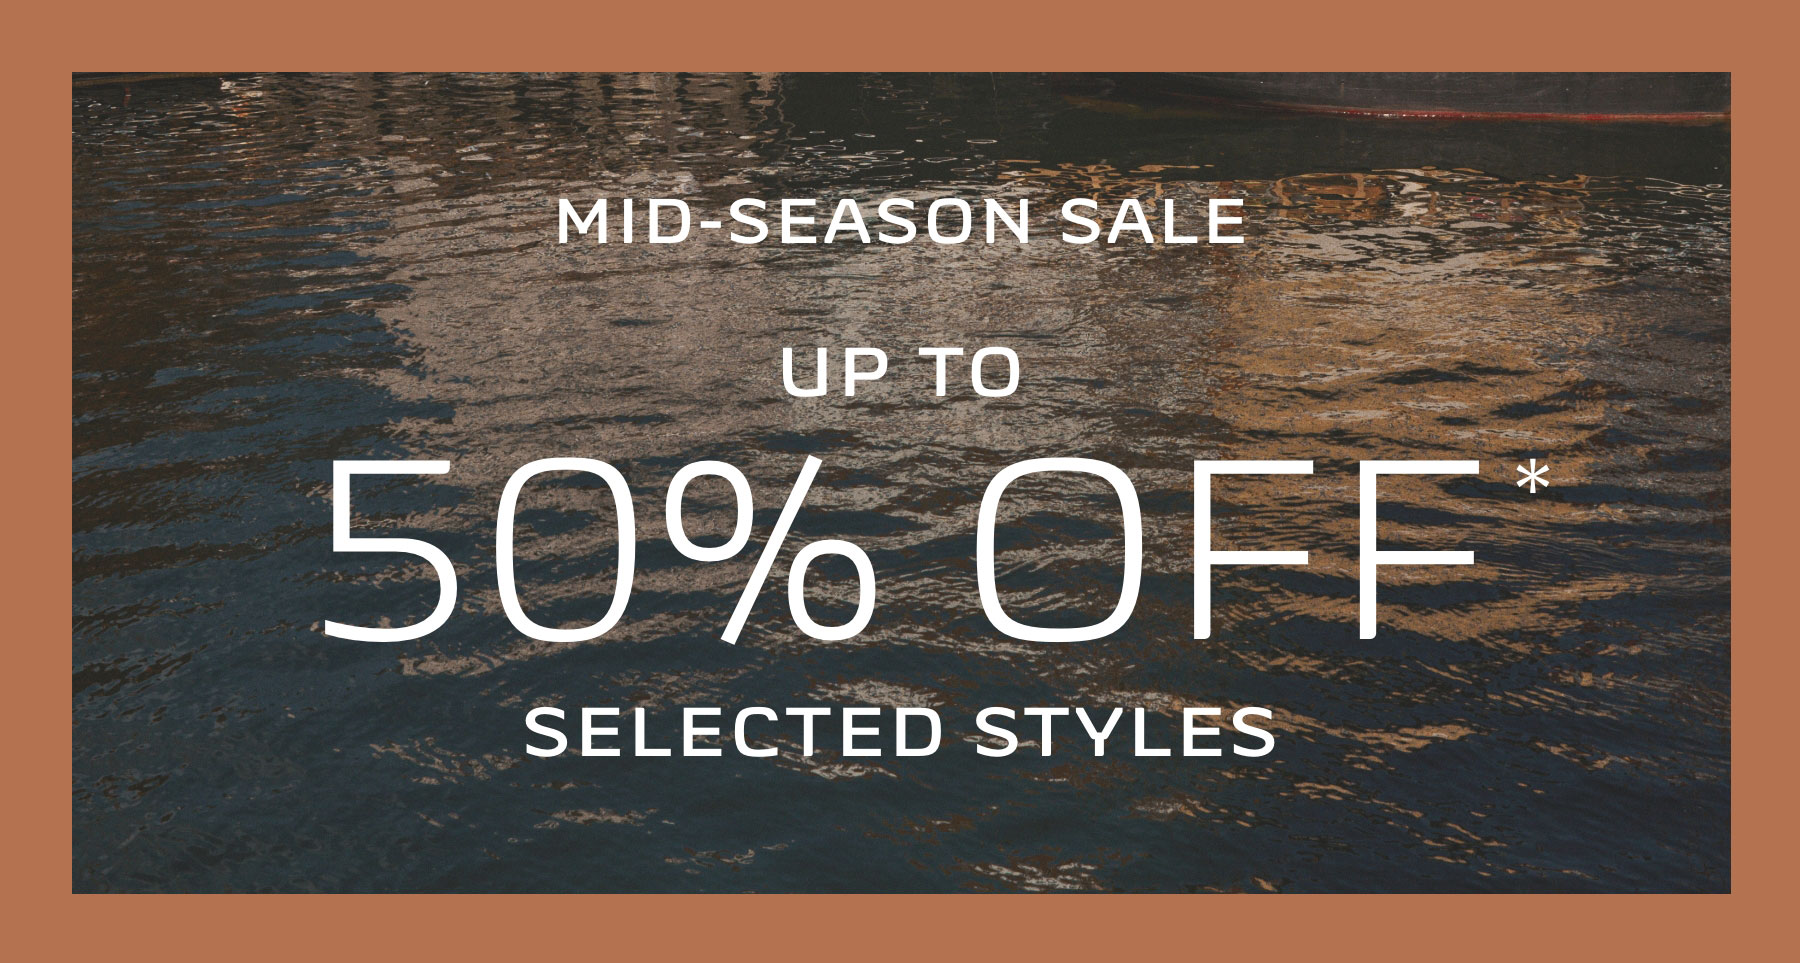 MID-SEASON SALE UP TO 50% OFF* SELECTED STYLES